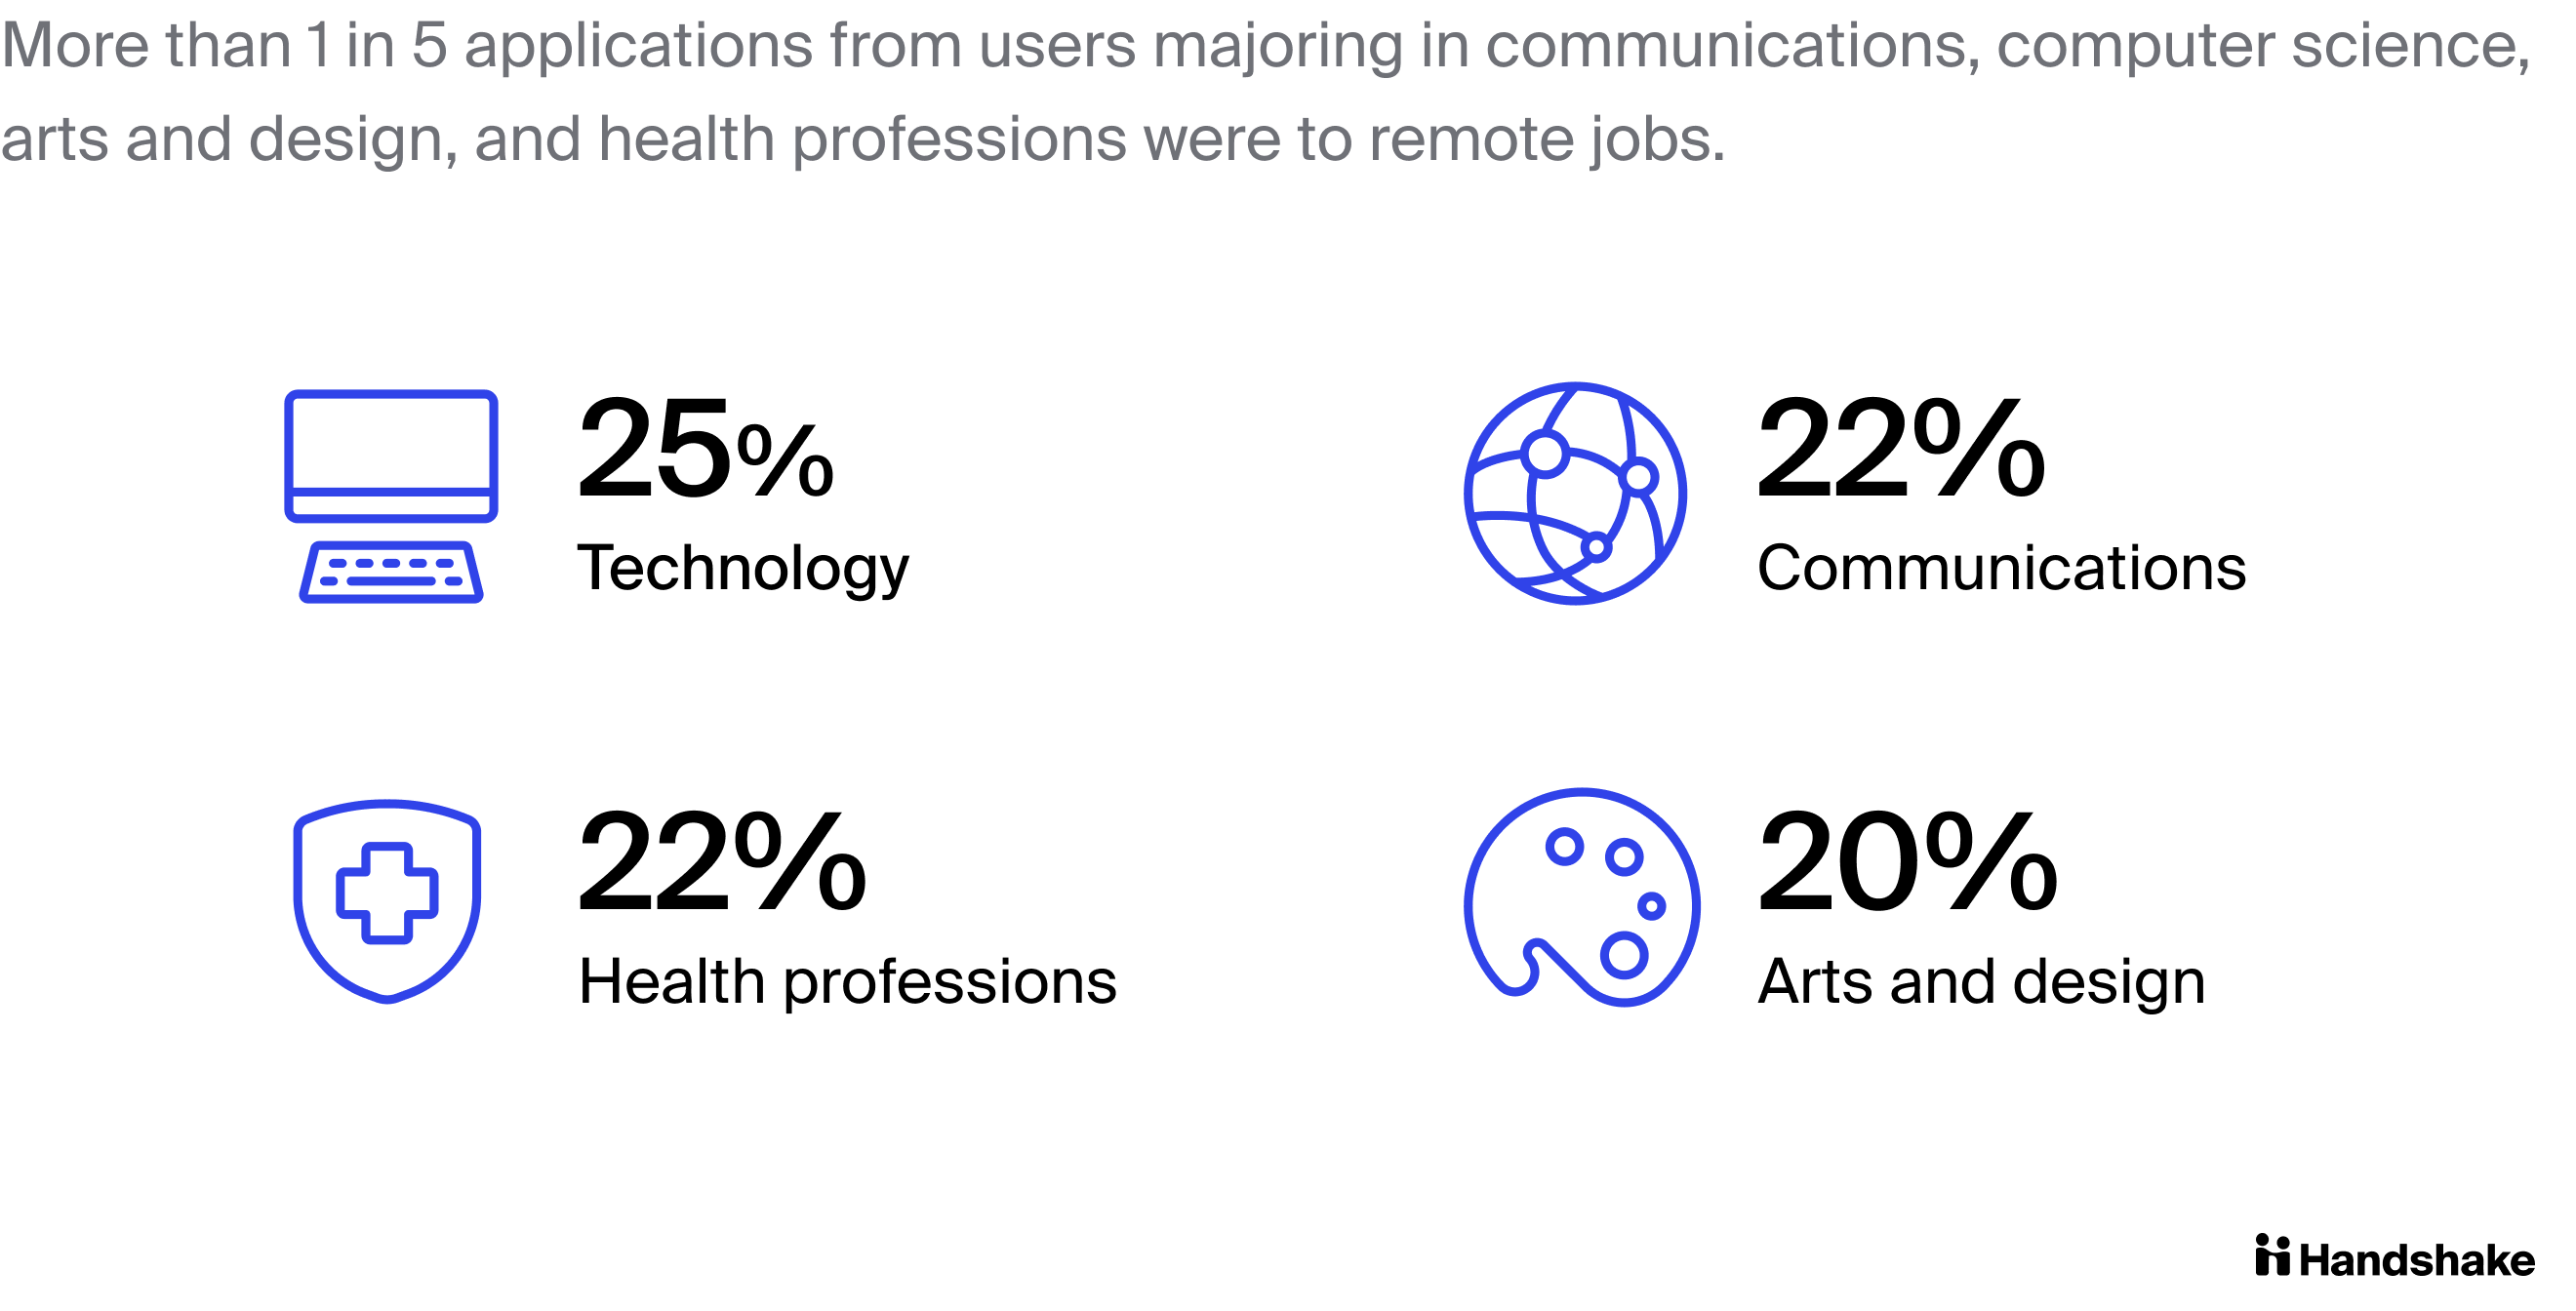 More than 1 in 5 applications from users majoring in communications, computer science, arts and design, and health professions were remote jobs Pictograph showing percentage of applications by student major (technology = 25%; communications =22%; health professions = 22%; arts and design = 20%)